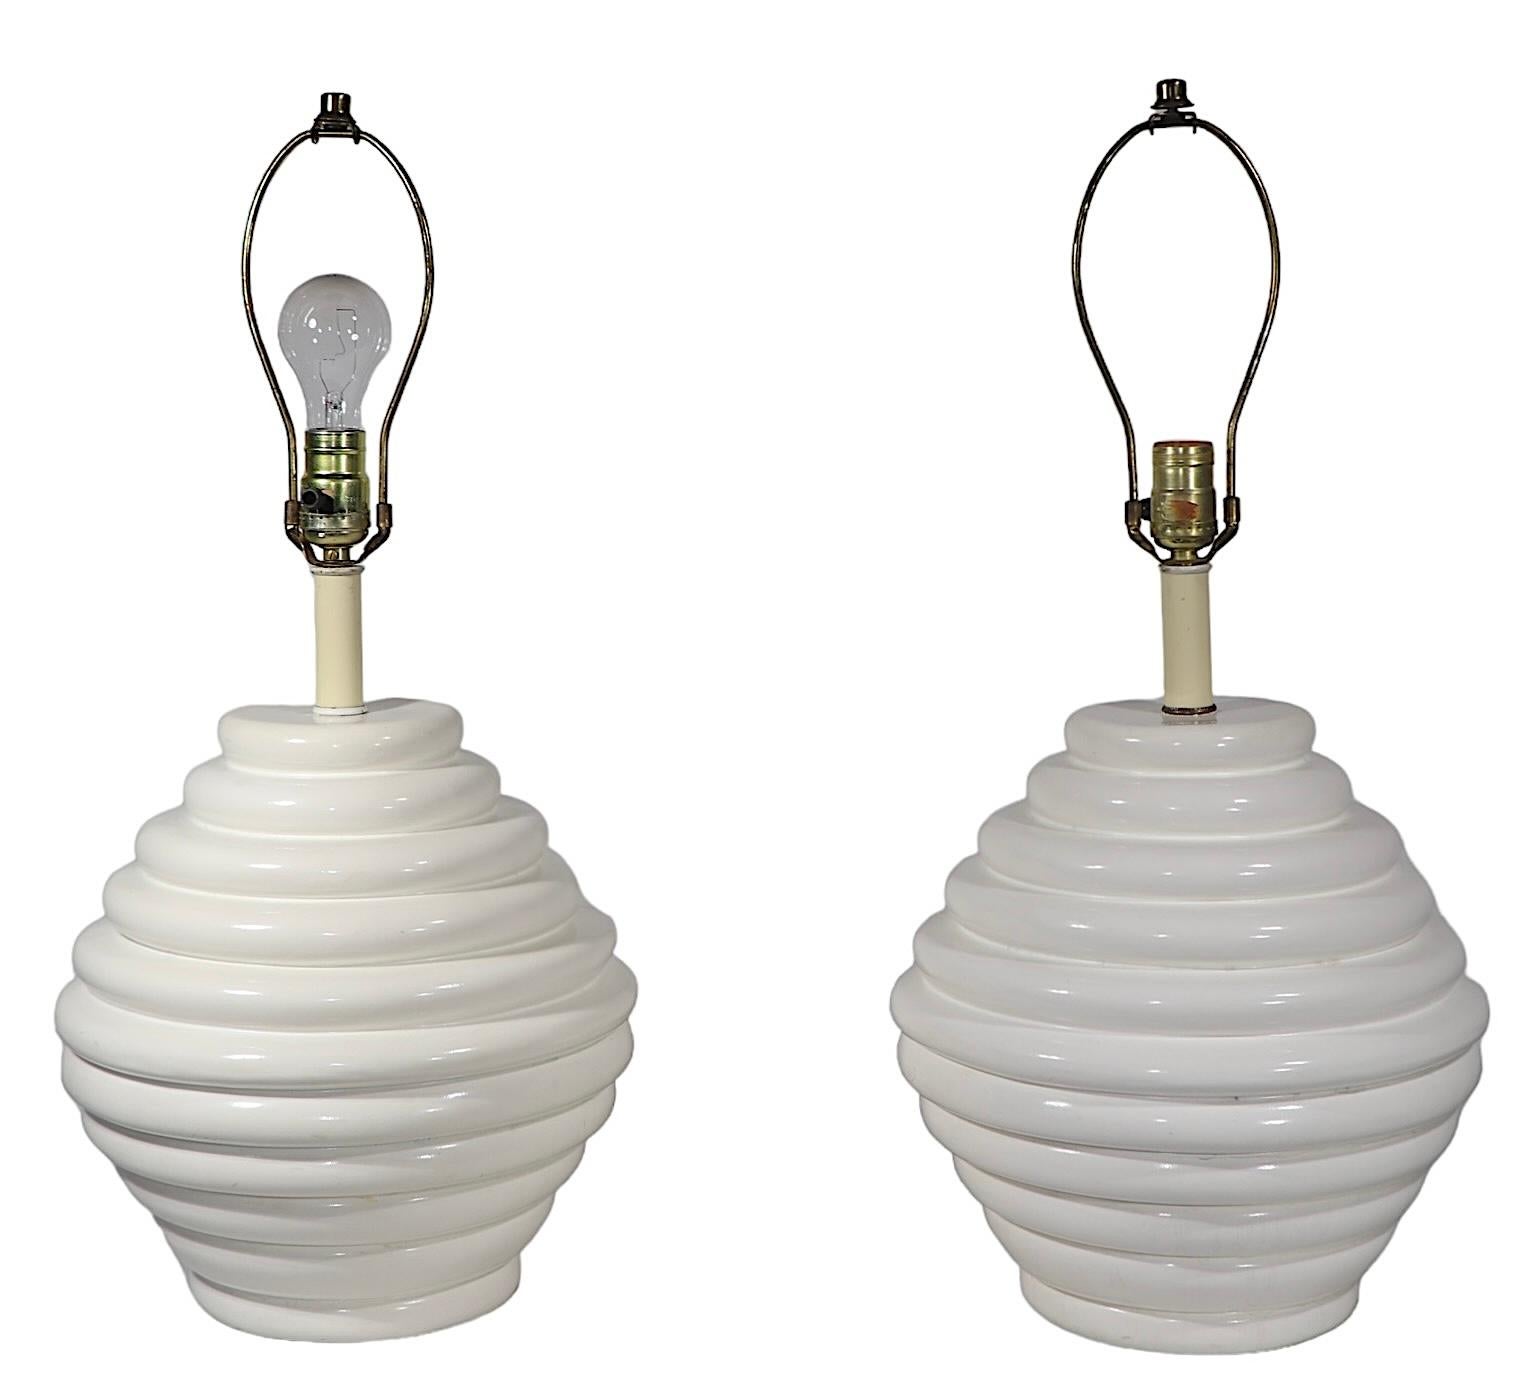 20th Century Pr. Mid Century Space Age Bulbous Form Table Lamps in White Finish c. 1950/70's For Sale